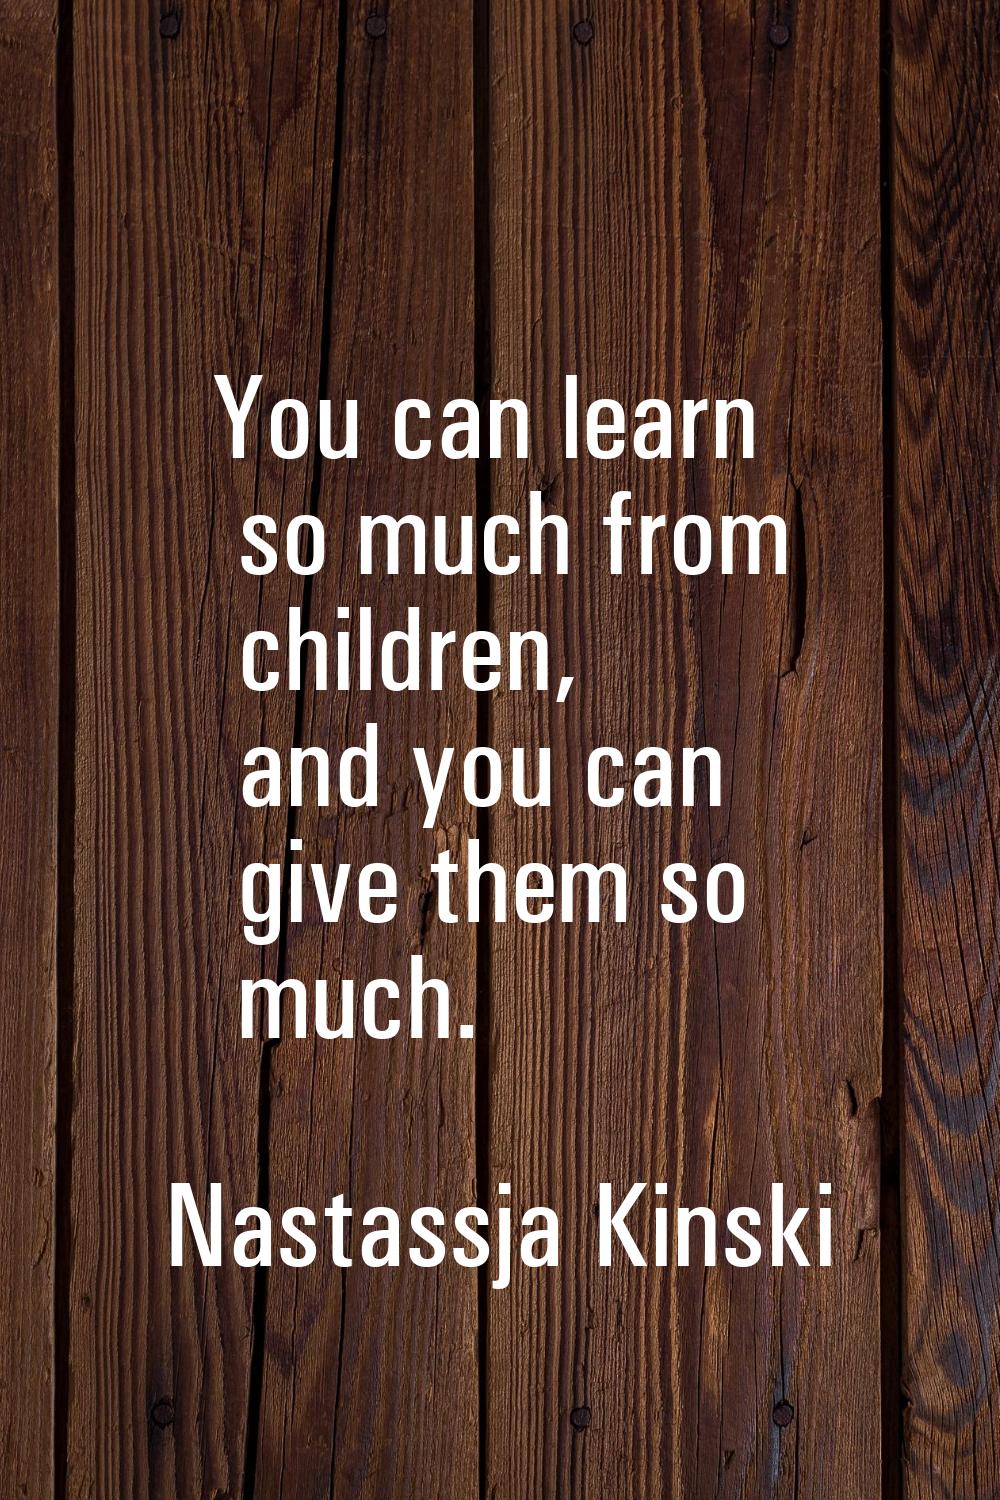 You can learn so much from children, and you can give them so much.